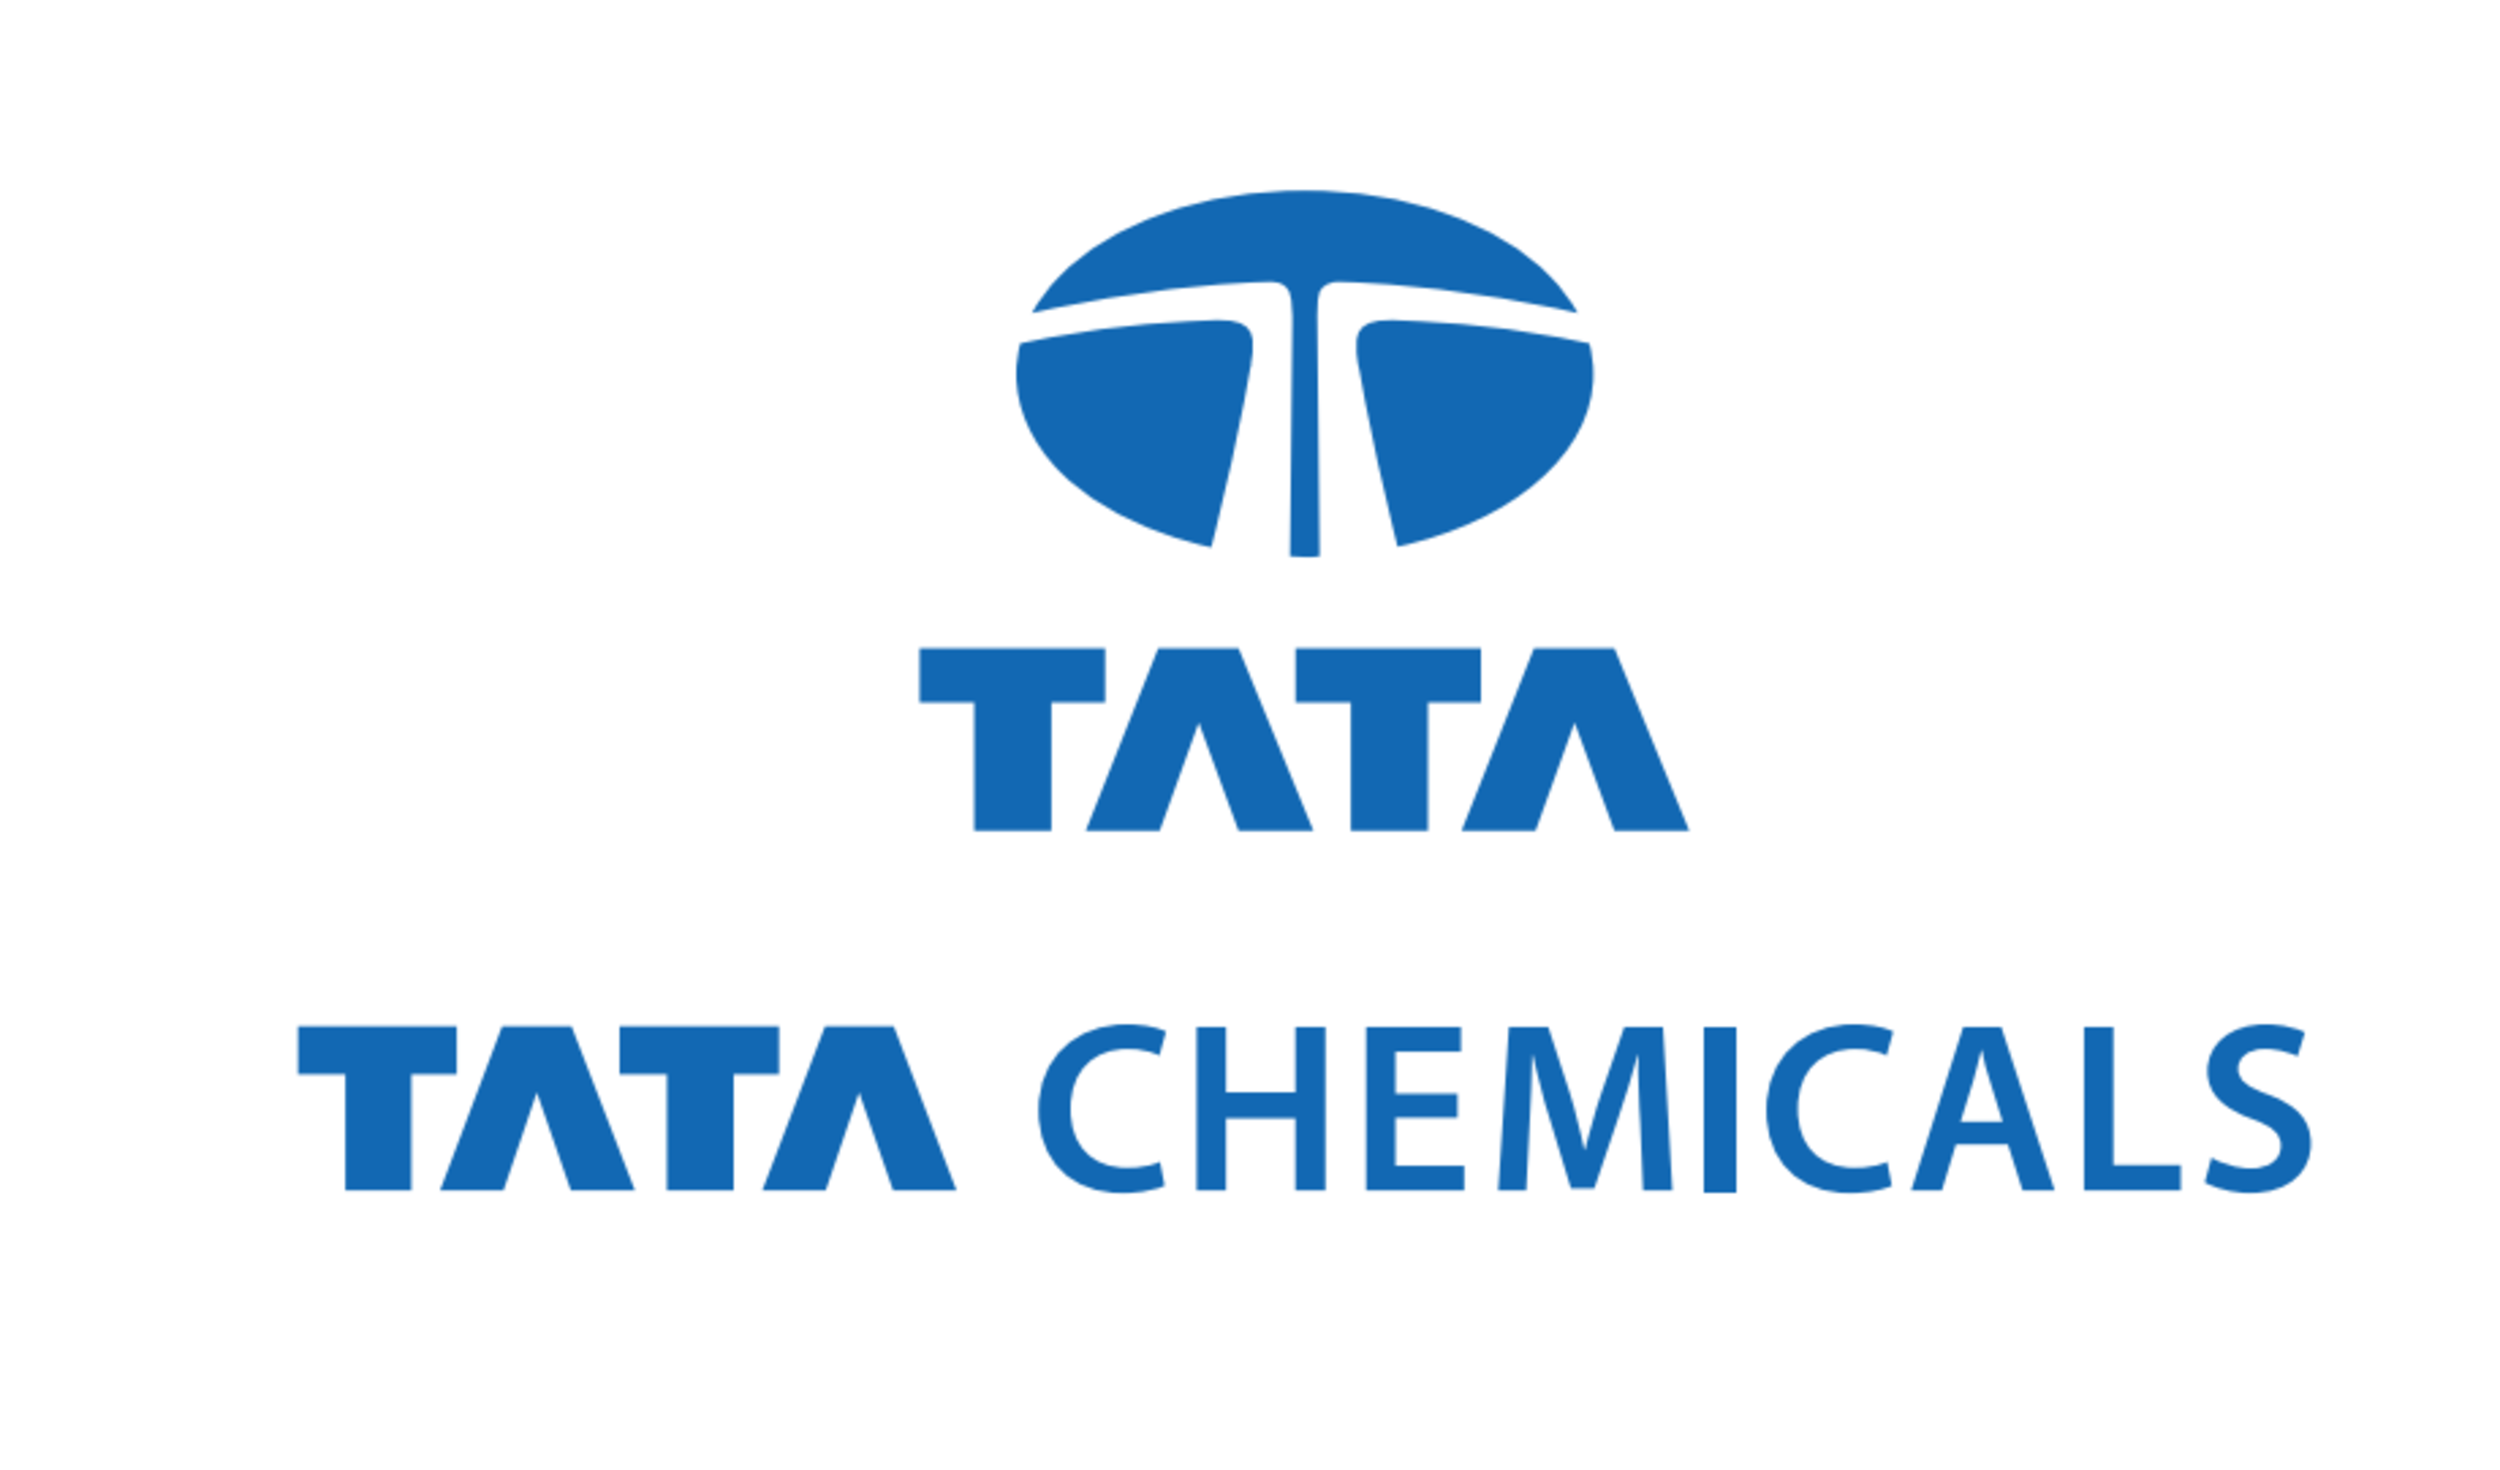 ‘Tata Chemicals awarded with a 5-star rating by Shri Pralhad Joshi, Minister of Mines’